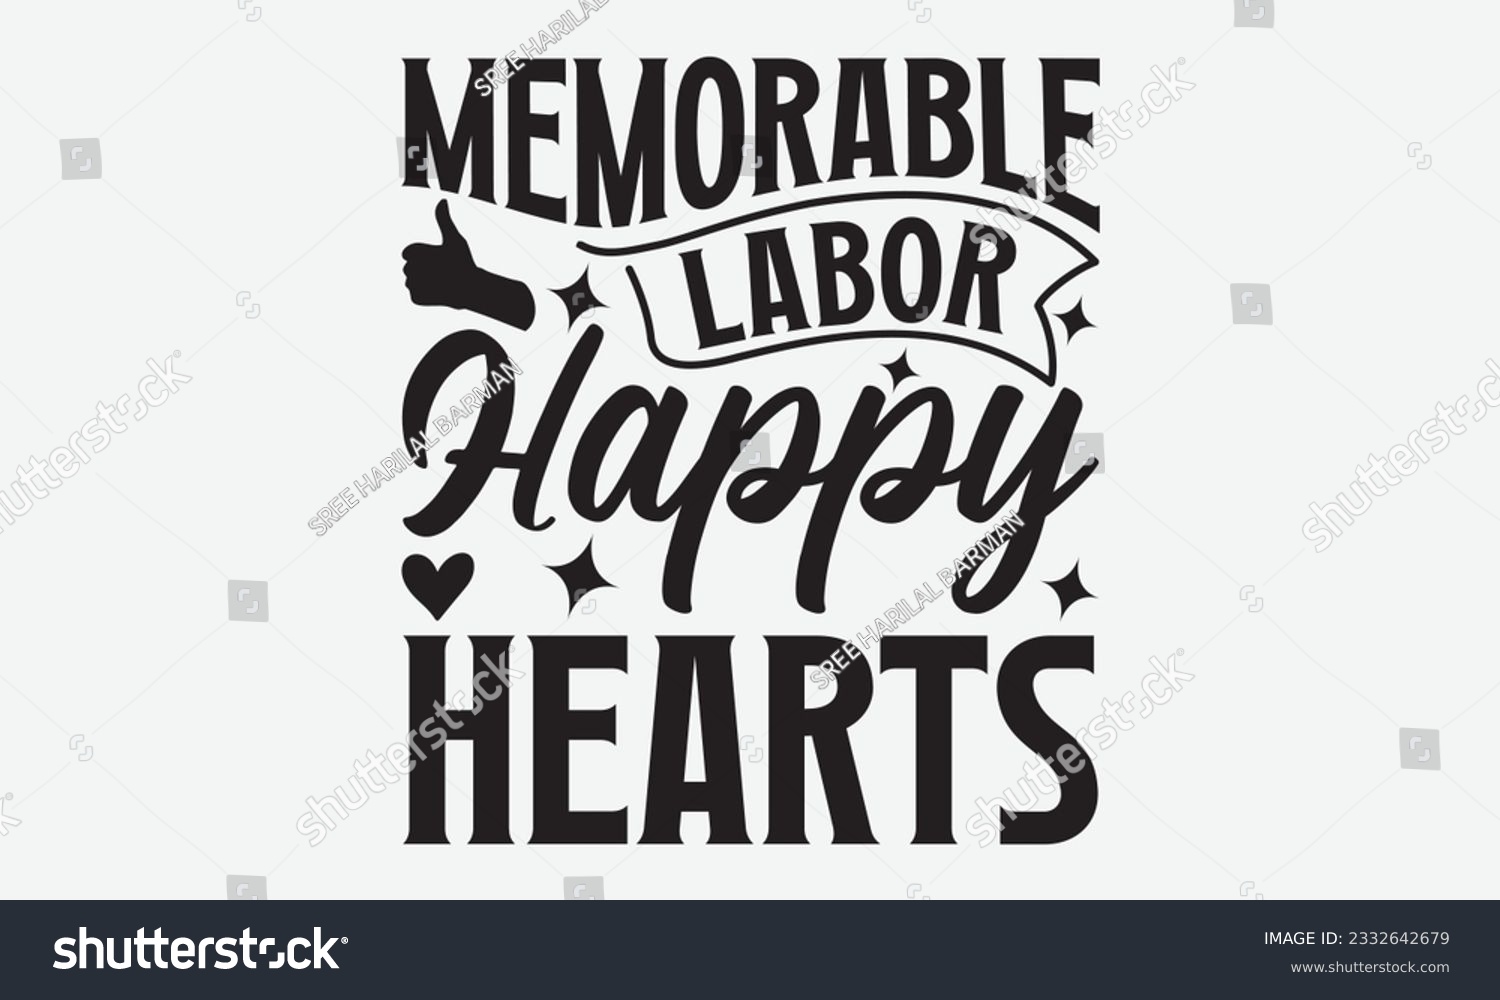 SVG of Memorable Labor Happy Hearts - Labor svg typography t-shirt design. celebration in calligraphy text or font Labor in the Middle East. Greeting cards, templates, and mugs. EPS 10. svg